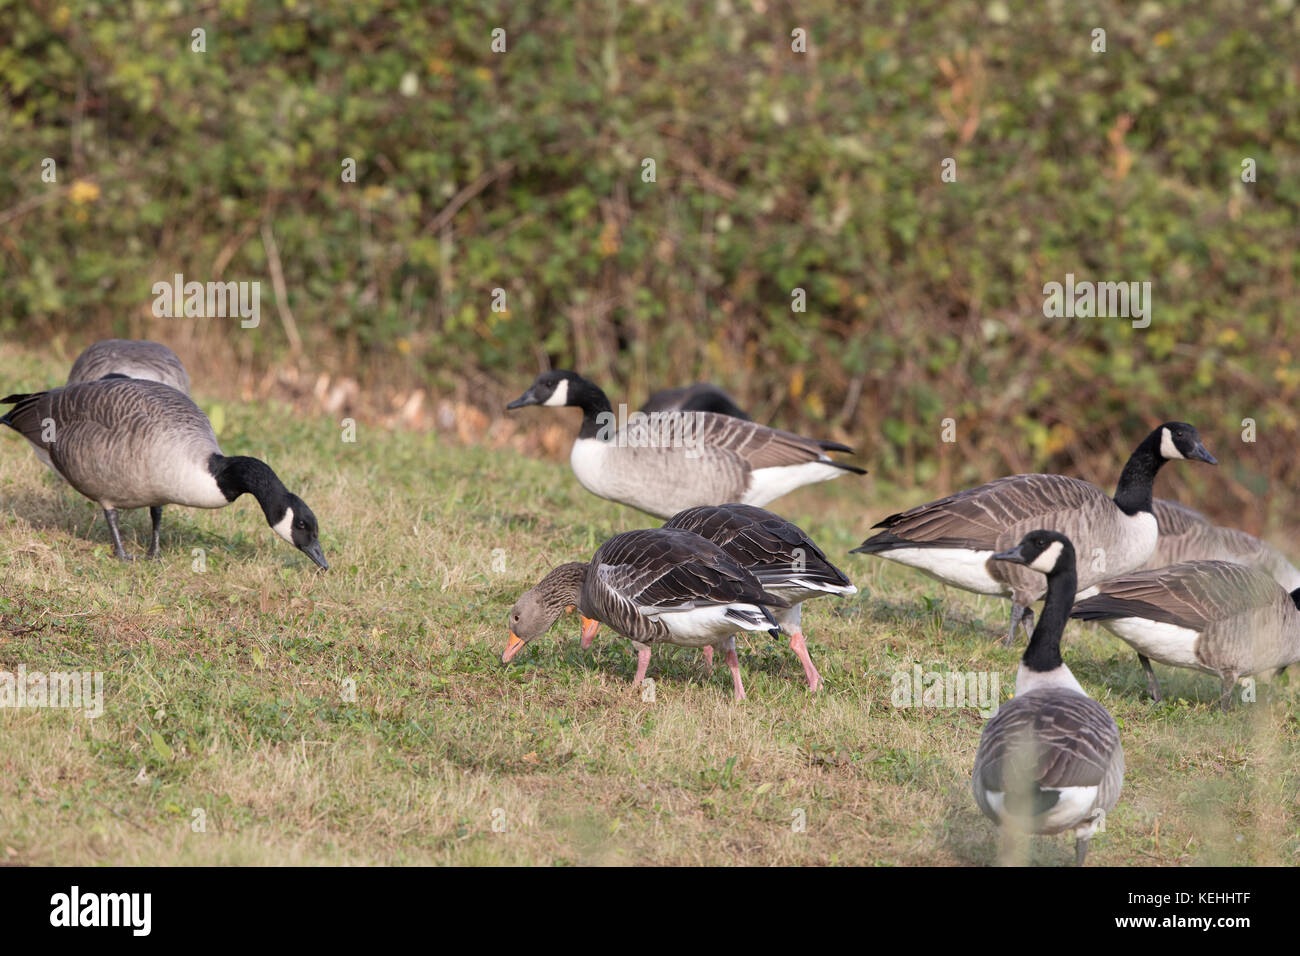 Greylag geese on a grass bank with Canada Geese , Shropshire/Welsh borders,uk,2017 Stock Photo